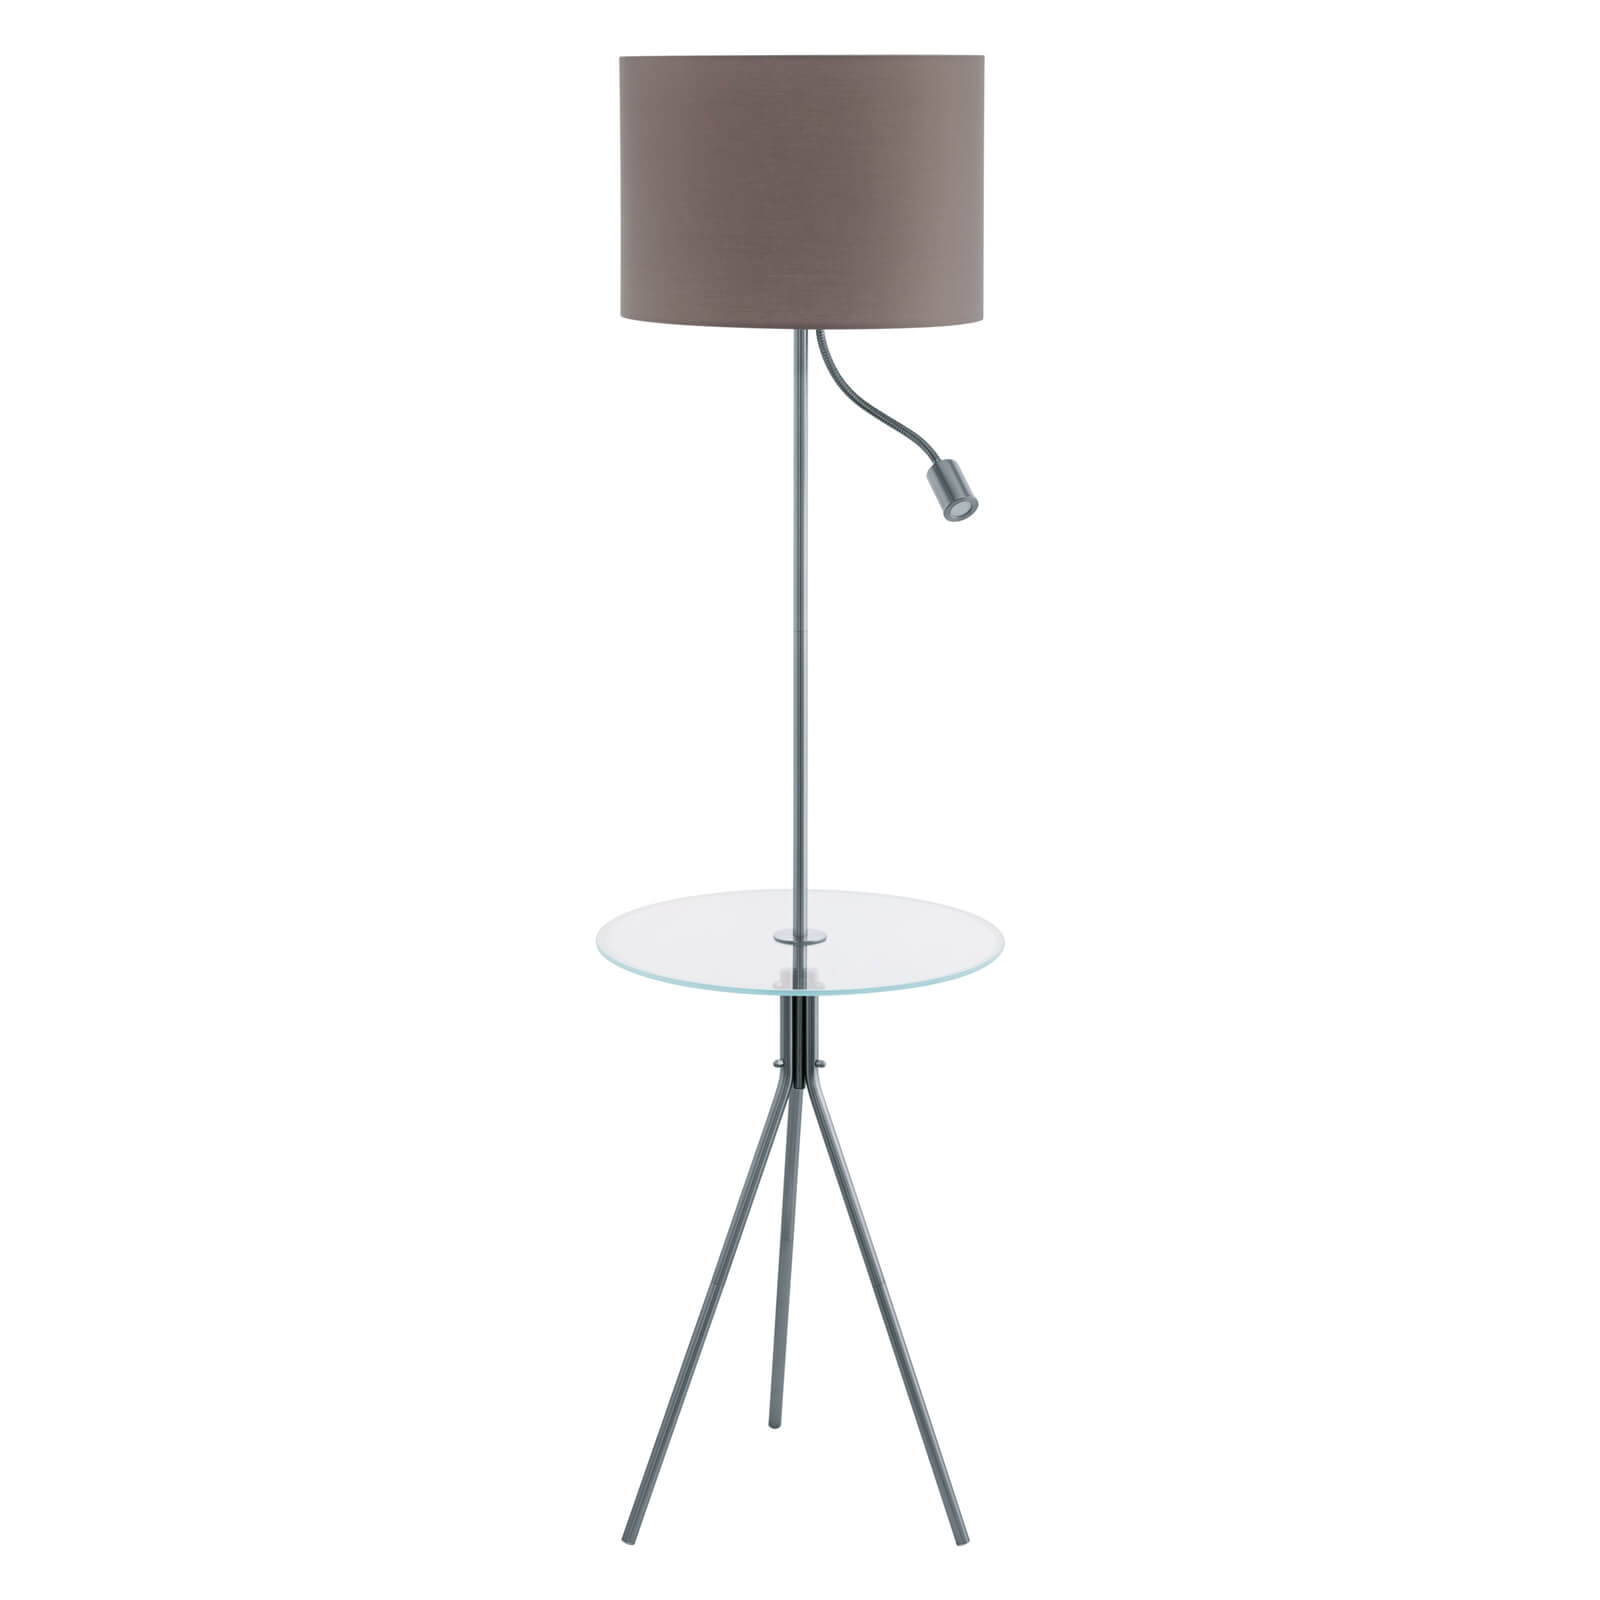 Eglo Policara Floor Lamp with Reading Lamp - Nickel & Taupe